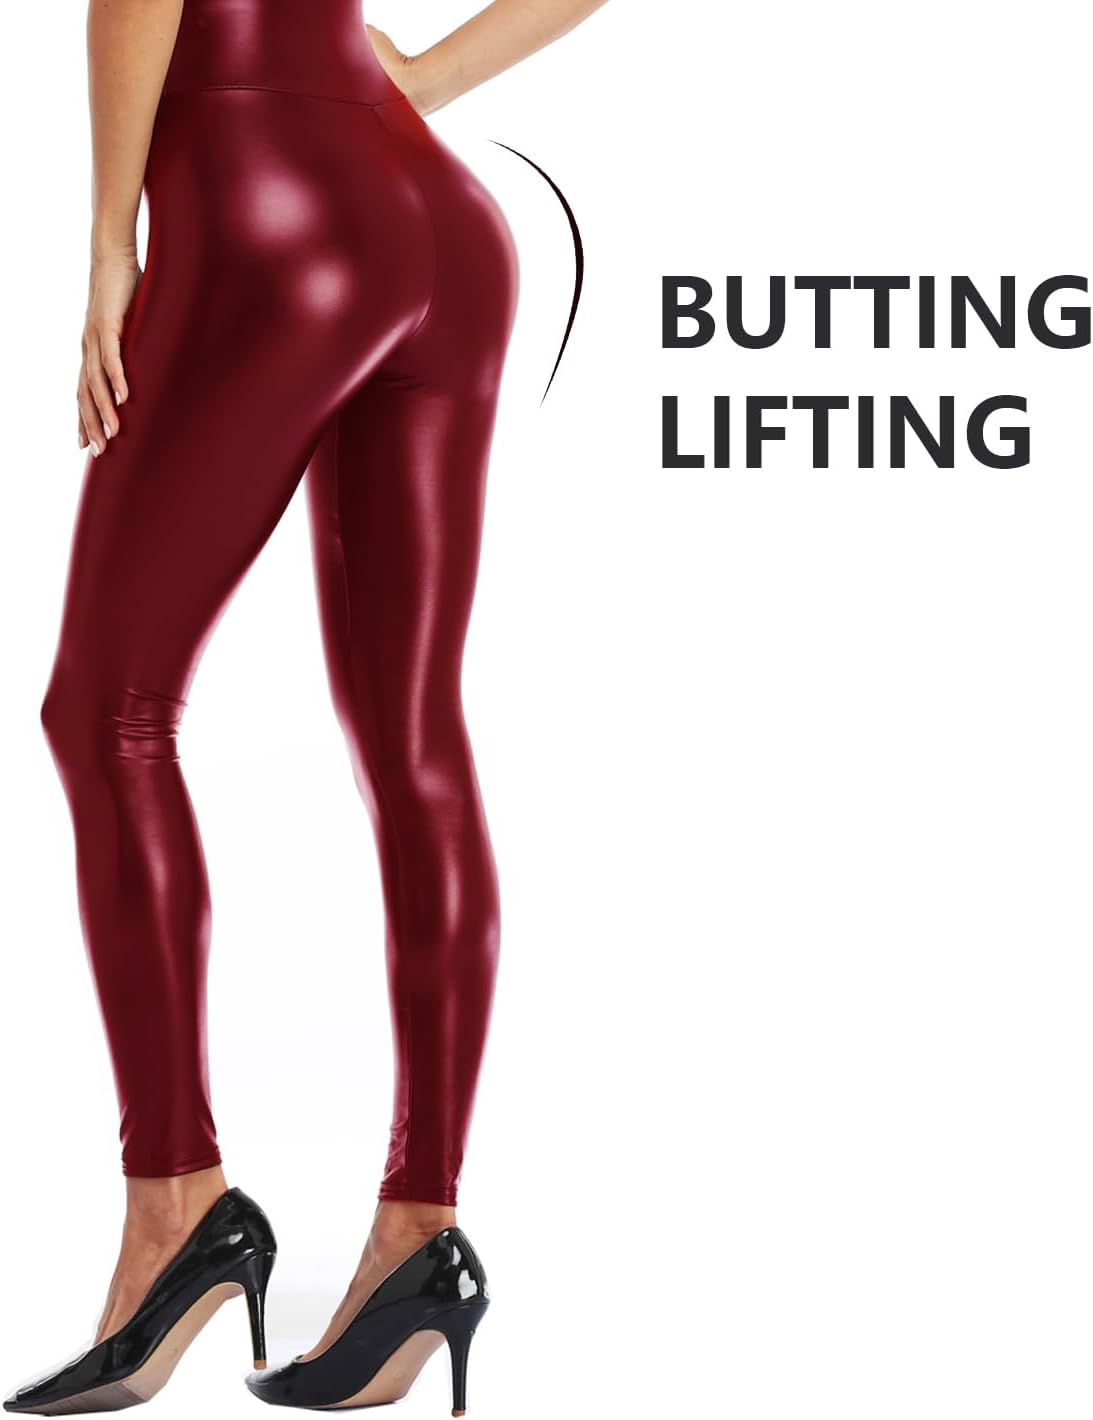 Joelynne Womens Faux Leather Leggings, High Waisted Sexy Butting Lifting Tights for Women, Stretch PU with Thin Fleece Lined